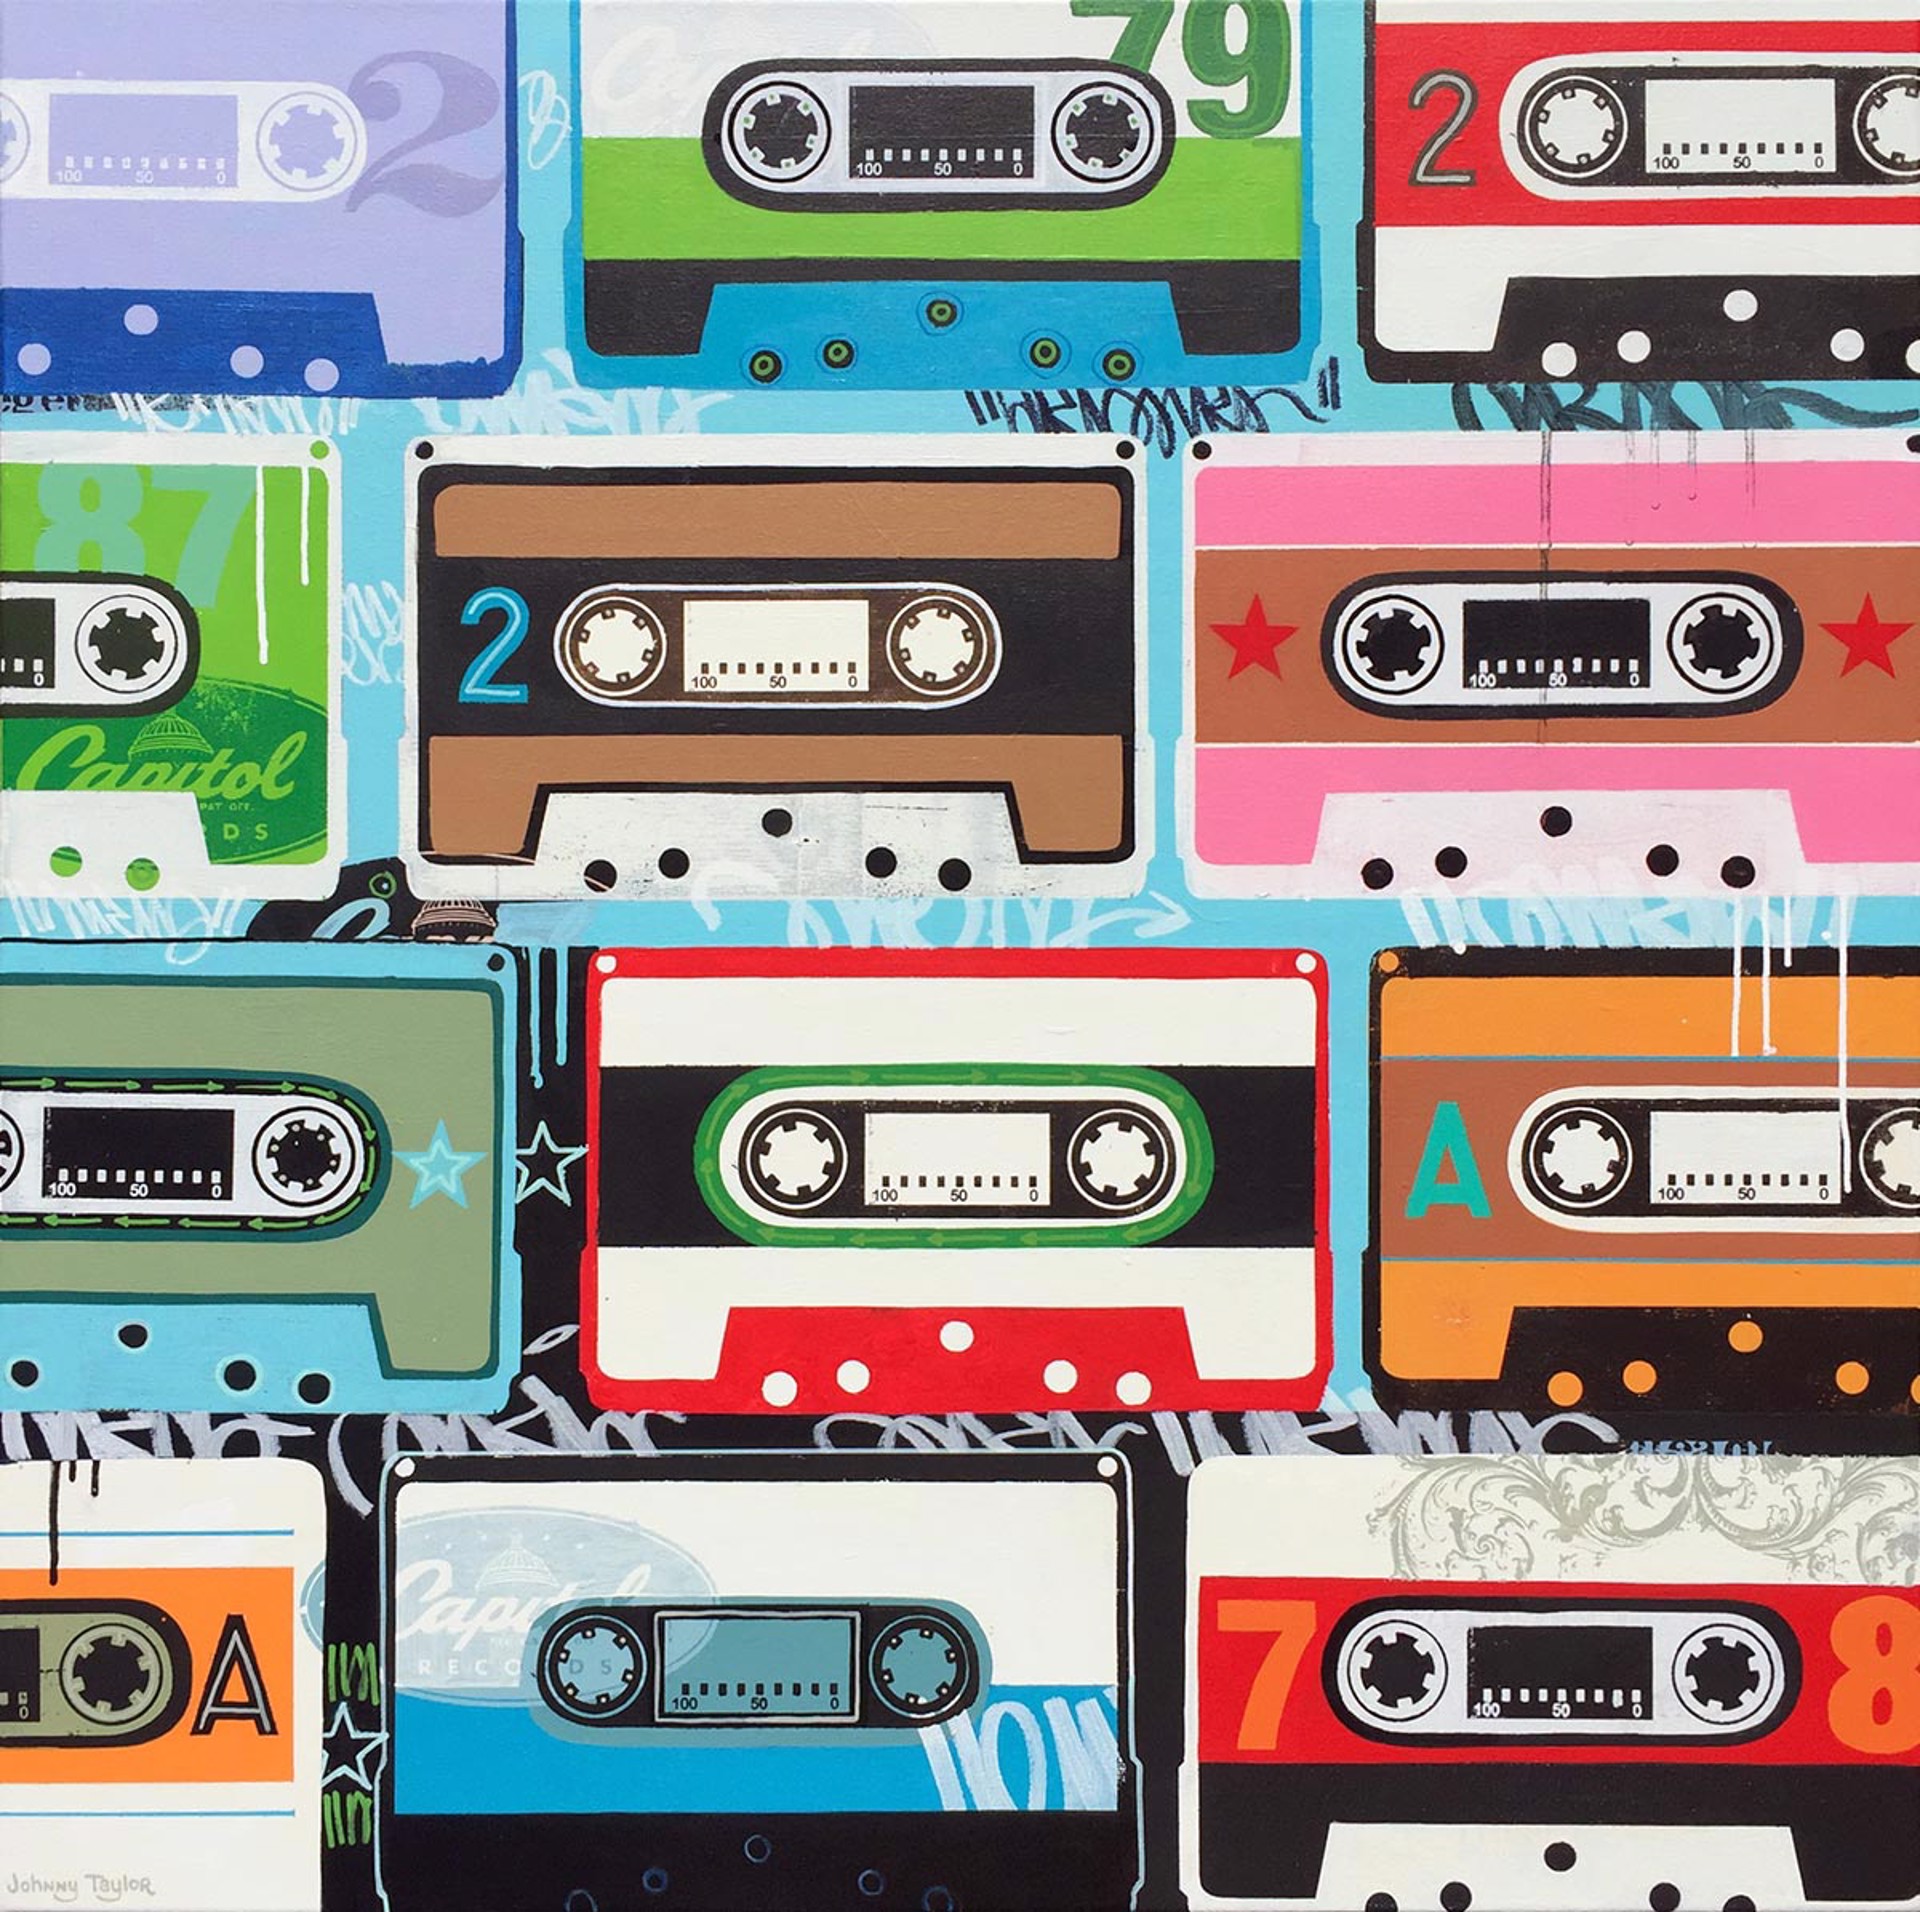 Cassettes by Johnny Taylor